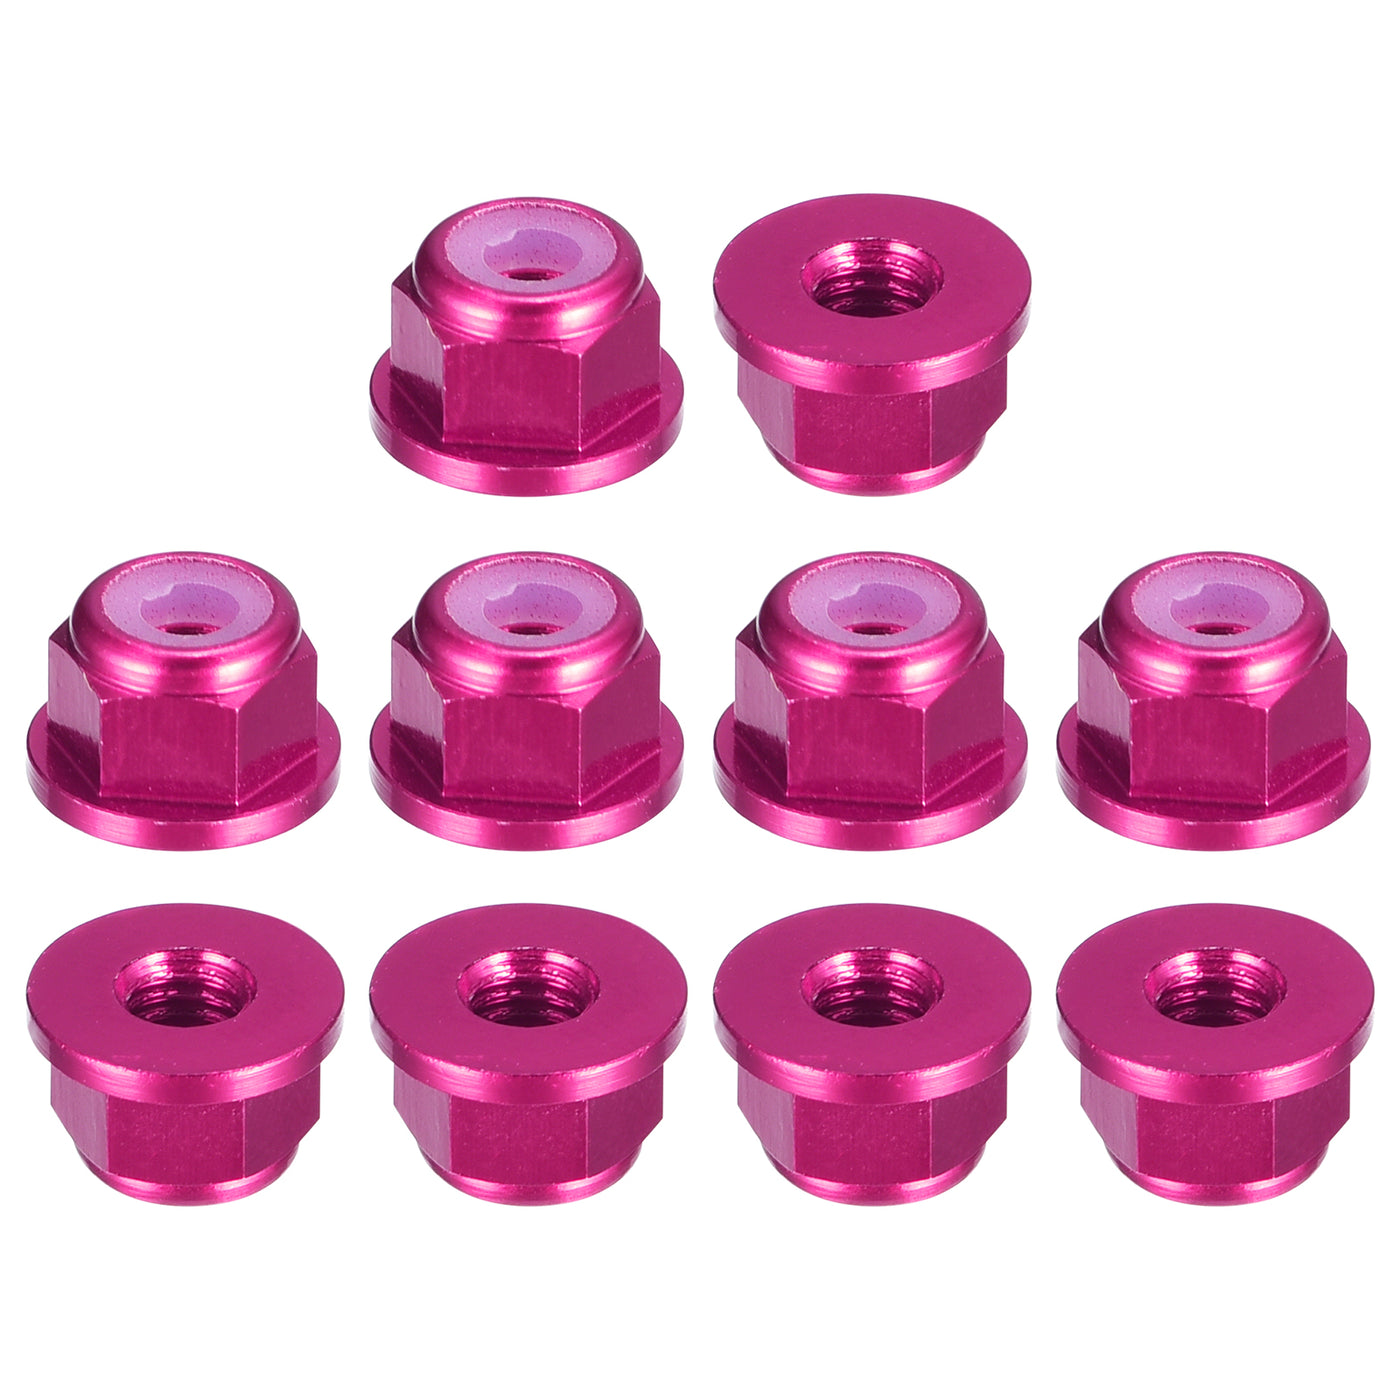 uxcell Uxcell Nylon Insert Hex Lock Nuts, 10pcs - M3 x 0.5mm Aluminum Alloy Self-Locking Nut, Anodizing Flange Lock Nut for Fasteners (Pink)